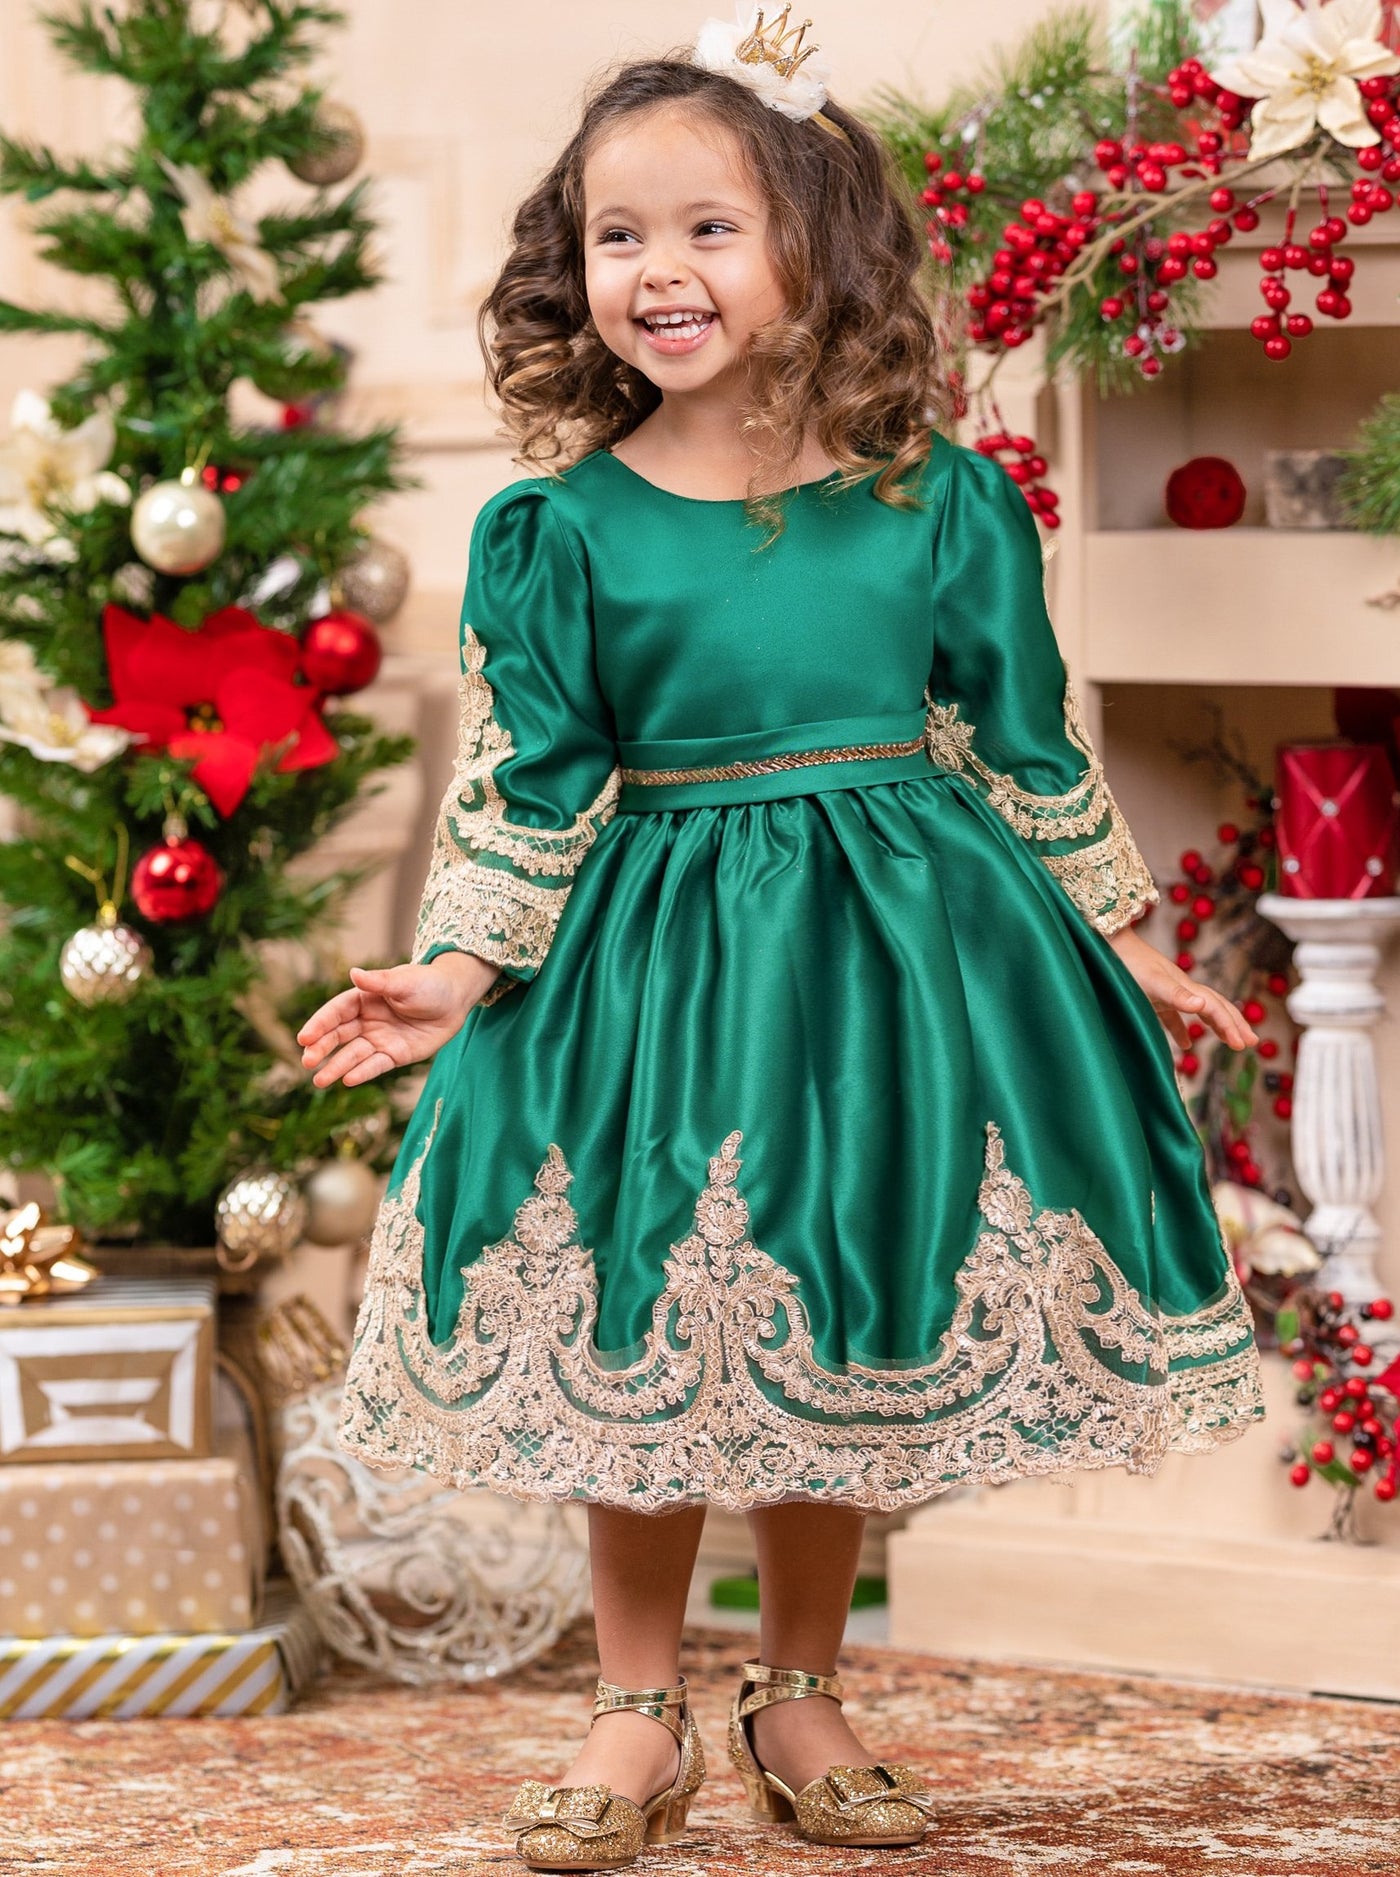 Girls Winter Formal Dress | Satin with Gold Embroidery Holiday Dress ...